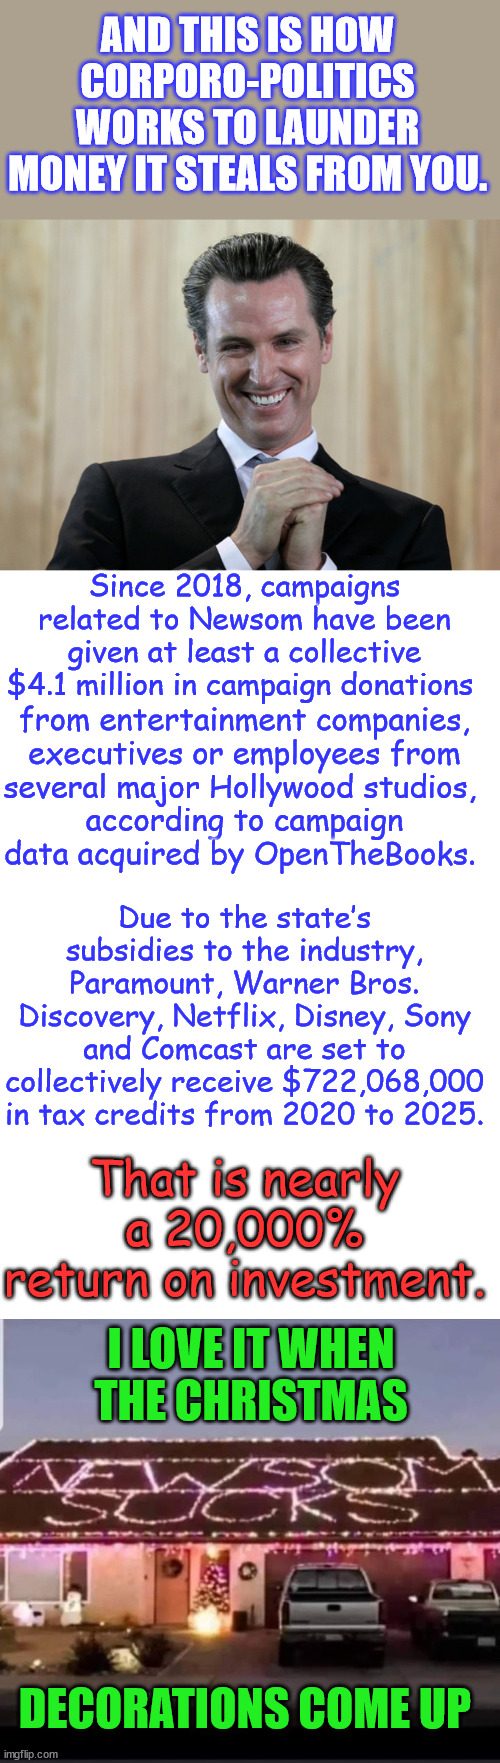 Remember this is what you get voting for a career politician... | AND THIS IS HOW CORPORO-POLITICS WORKS TO LAUNDER MONEY IT STEALS FROM YOU. Since 2018, campaigns related to Newsom have been given at least a collective $4.1 million in campaign donations; from entertainment companies, executives or employees from several major Hollywood studios, according to campaign data acquired by OpenTheBooks. Due to the state’s subsidies to the industry, Paramount, Warner Bros. Discovery, Netflix, Disney, Sony and Comcast are set to collectively receive $722,068,000 in tax credits from 2020 to 2025. That is nearly a 20,000% return on investment. I LOVE IT WHEN THE CHRISTMAS; DECORATIONS COME UP | image tagged in scheming gavin newsom,blank white template,corrupt,career,politicians | made w/ Imgflip meme maker